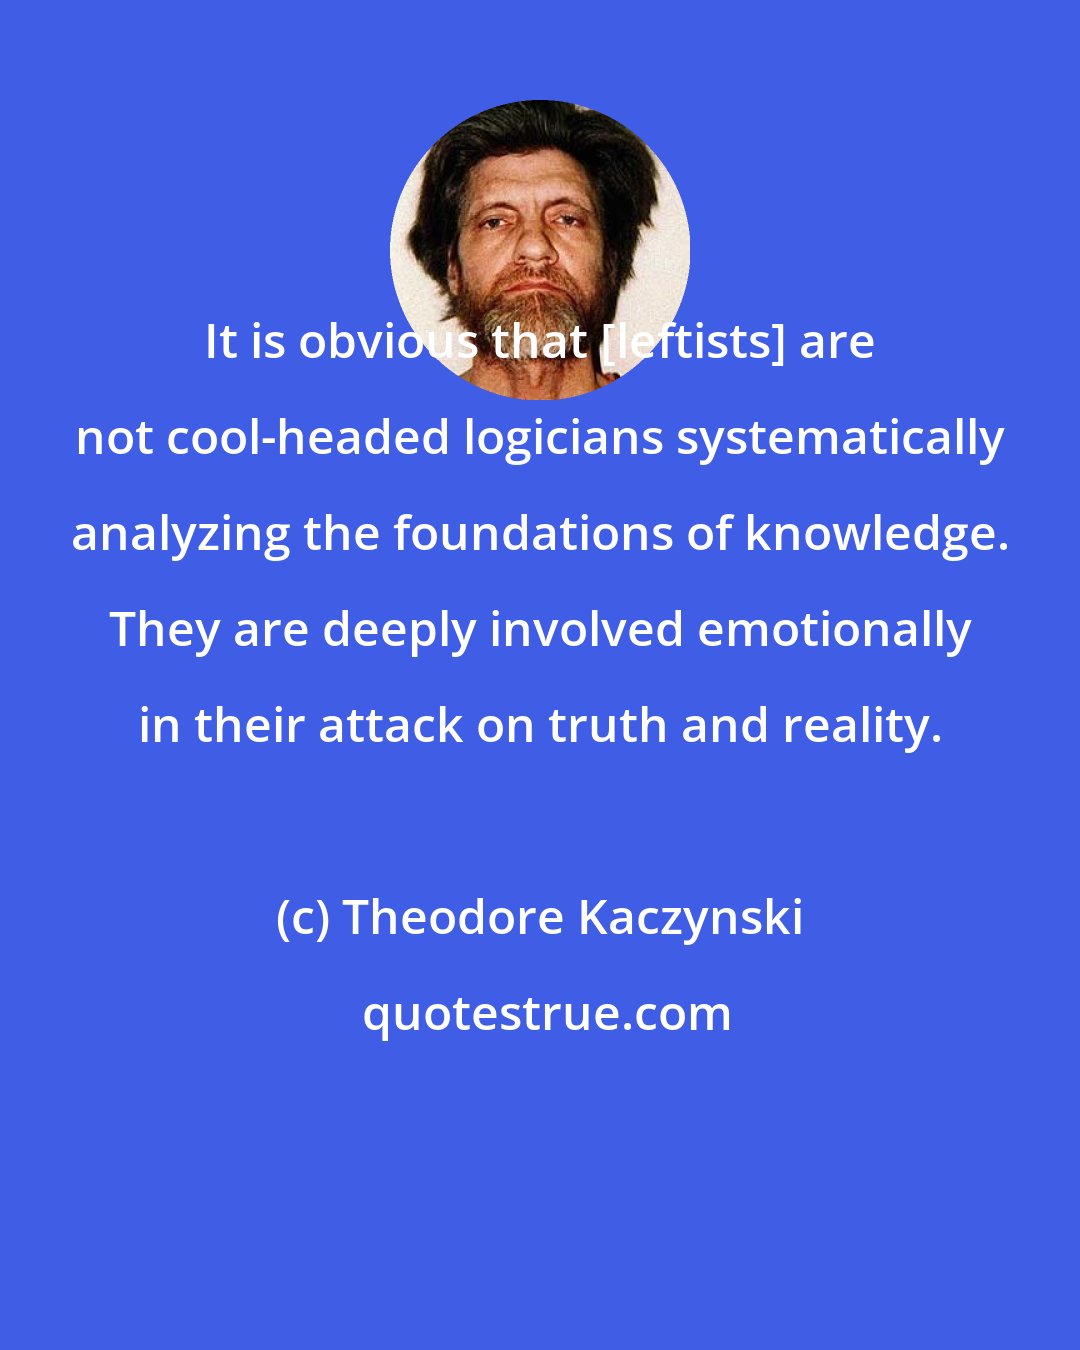 Theodore Kaczynski: It is obvious that [leftists] are not cool-headed logicians systematically analyzing the foundations of knowledge. They are deeply involved emotionally in their attack on truth and reality.